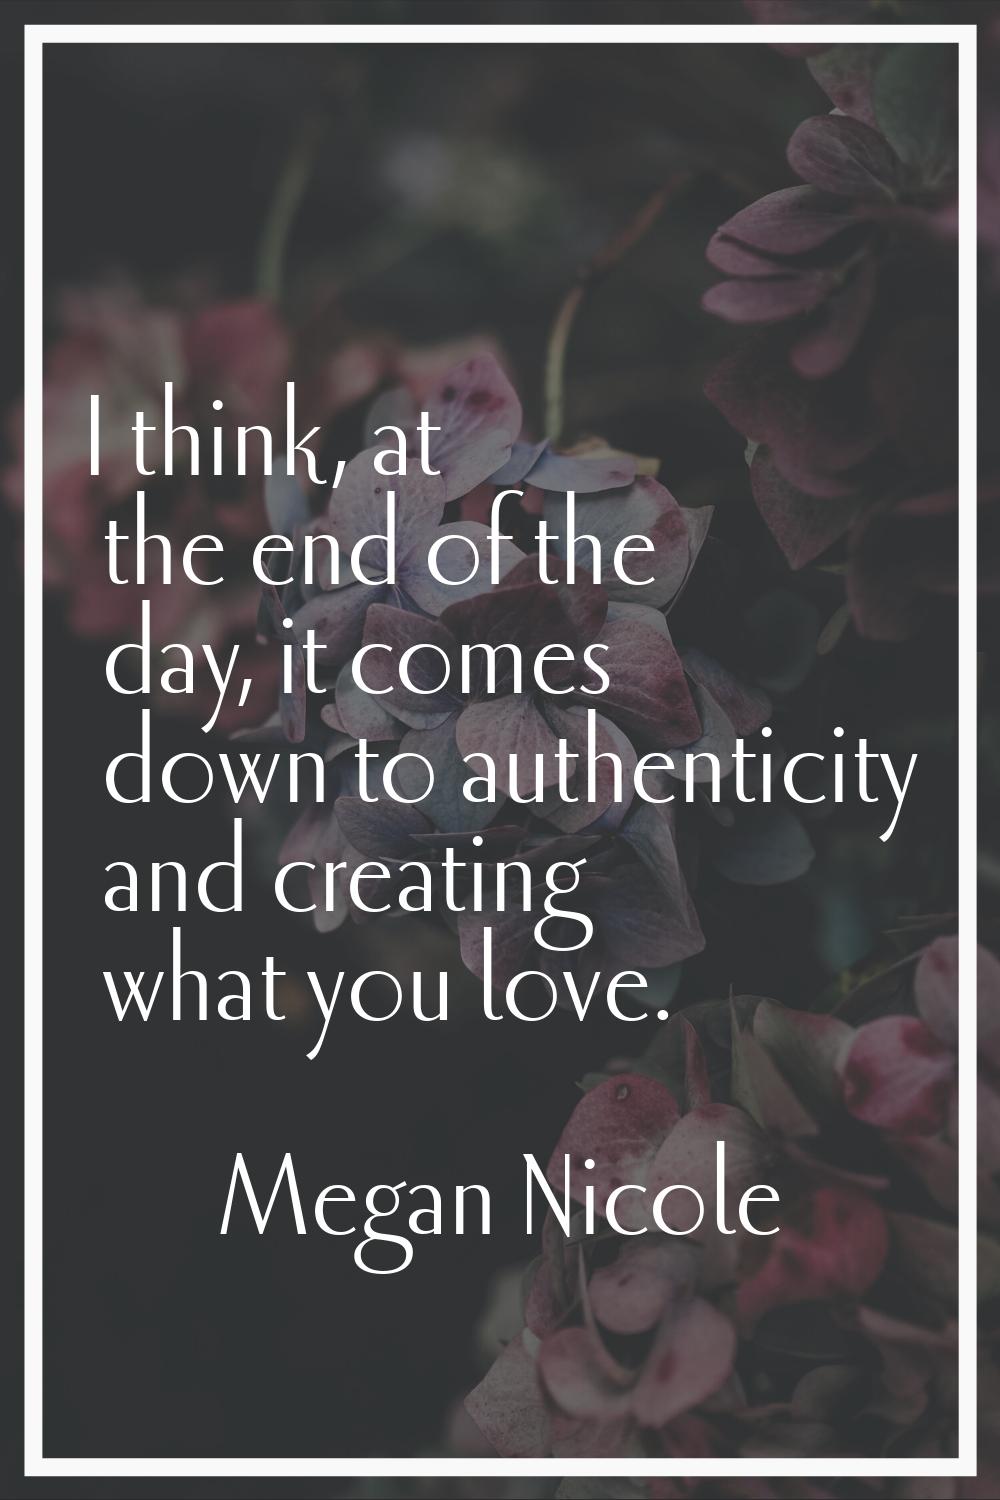 I think, at the end of the day, it comes down to authenticity and creating what you love.